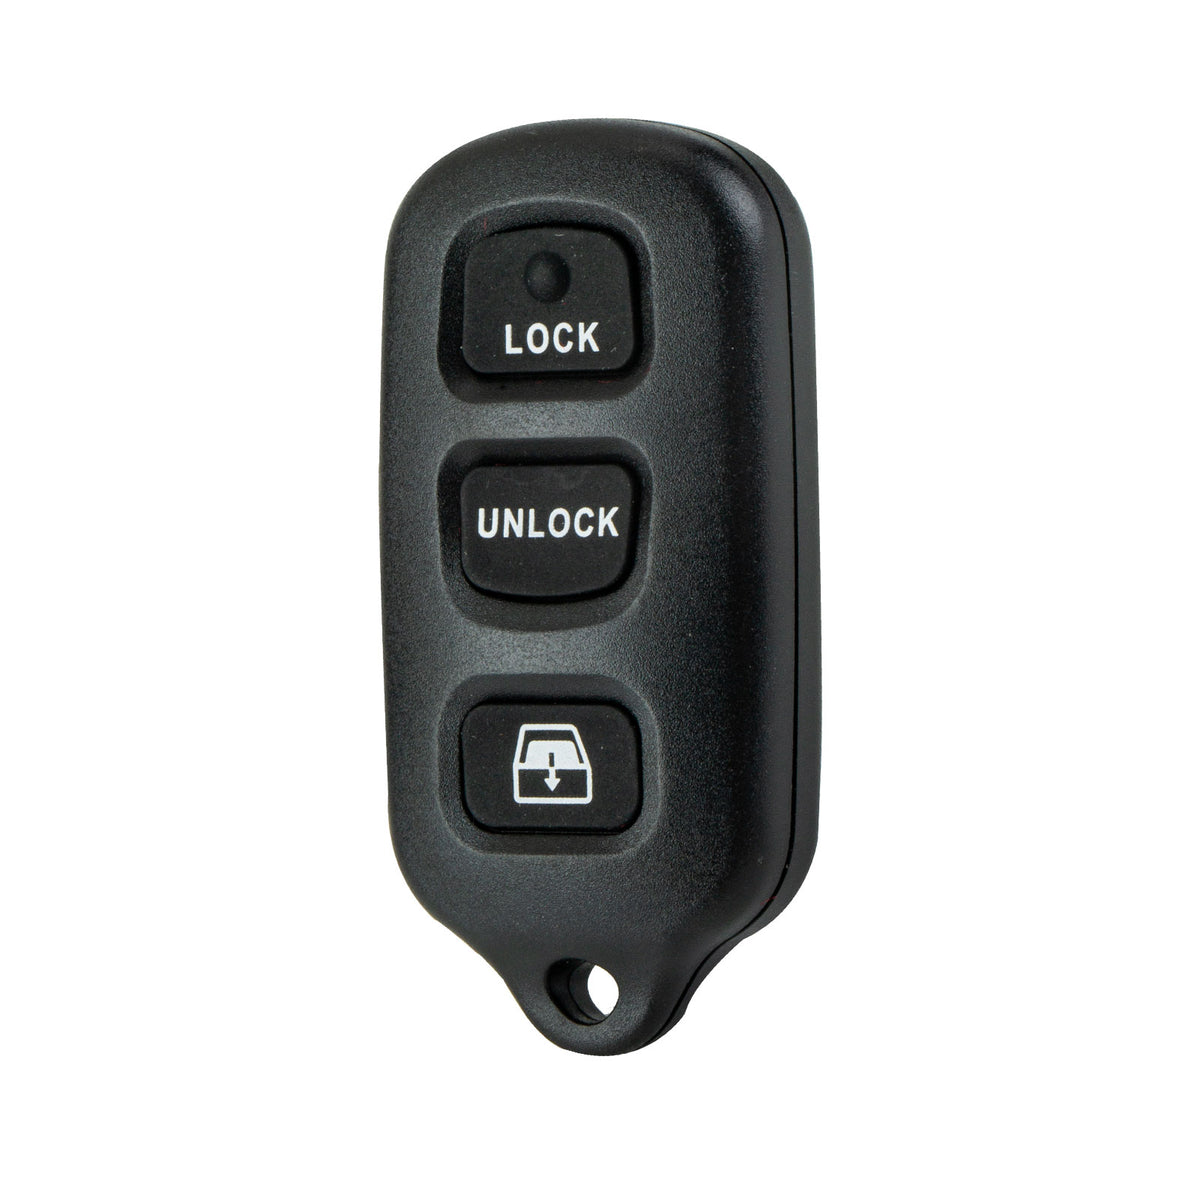 4 BTN Car Key Fob Replacement for 1999-2009 Toyota 4 Runner 2001-2008 Toyota Sequoia HYQ12BAN, HYQ12BBX, HYQ1512Y